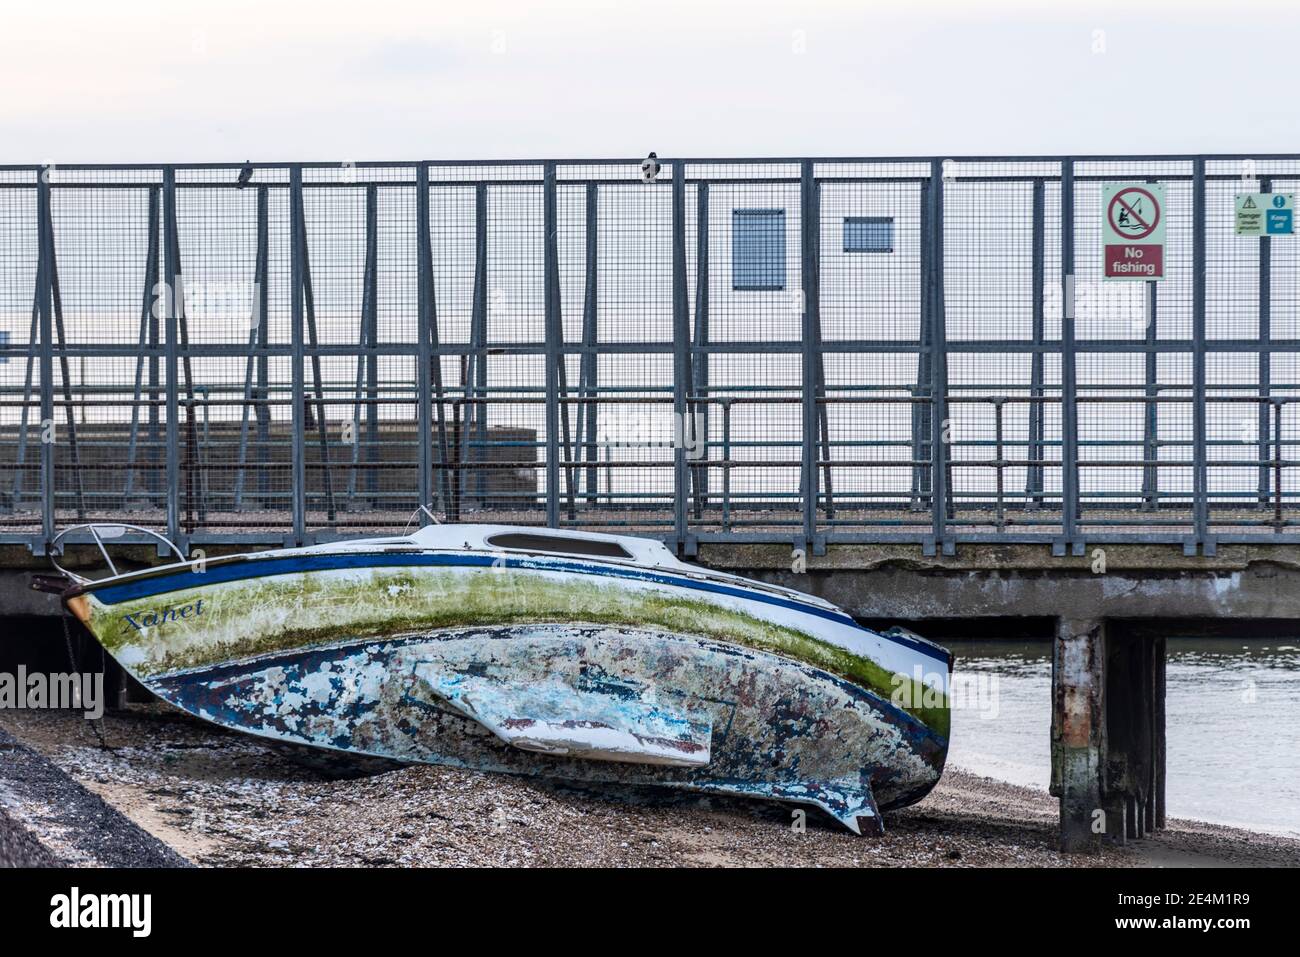 Boat named Xanet washed up onto the beach by stormy seas. Washed against Barge Pier, Shoeburyness, Essex, UK, on MoD land off limits due to ordnance Stock Photo